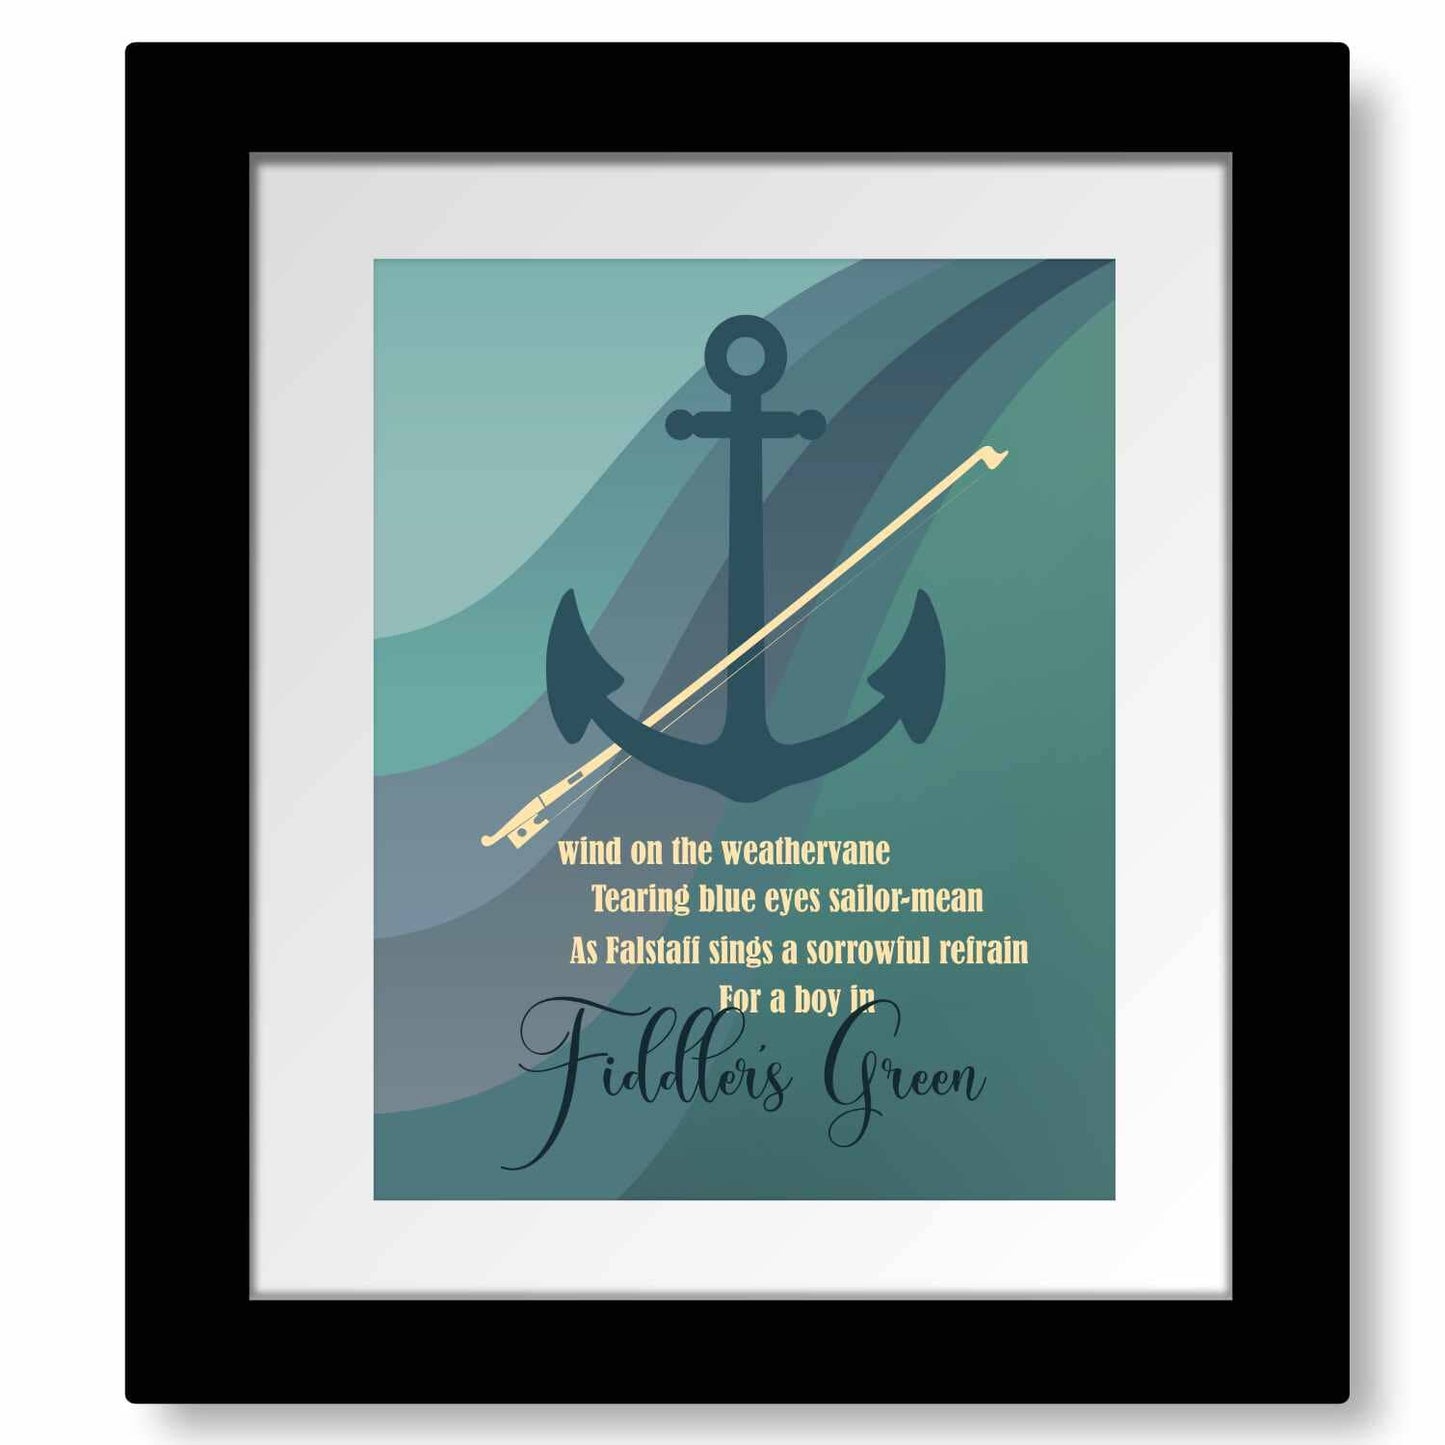 Fiddlers Green by Tragically Hip - Song Lyric Music Wall Art Song Lyrics Art Song Lyrics Art 8x10 Matted and Framed Print 